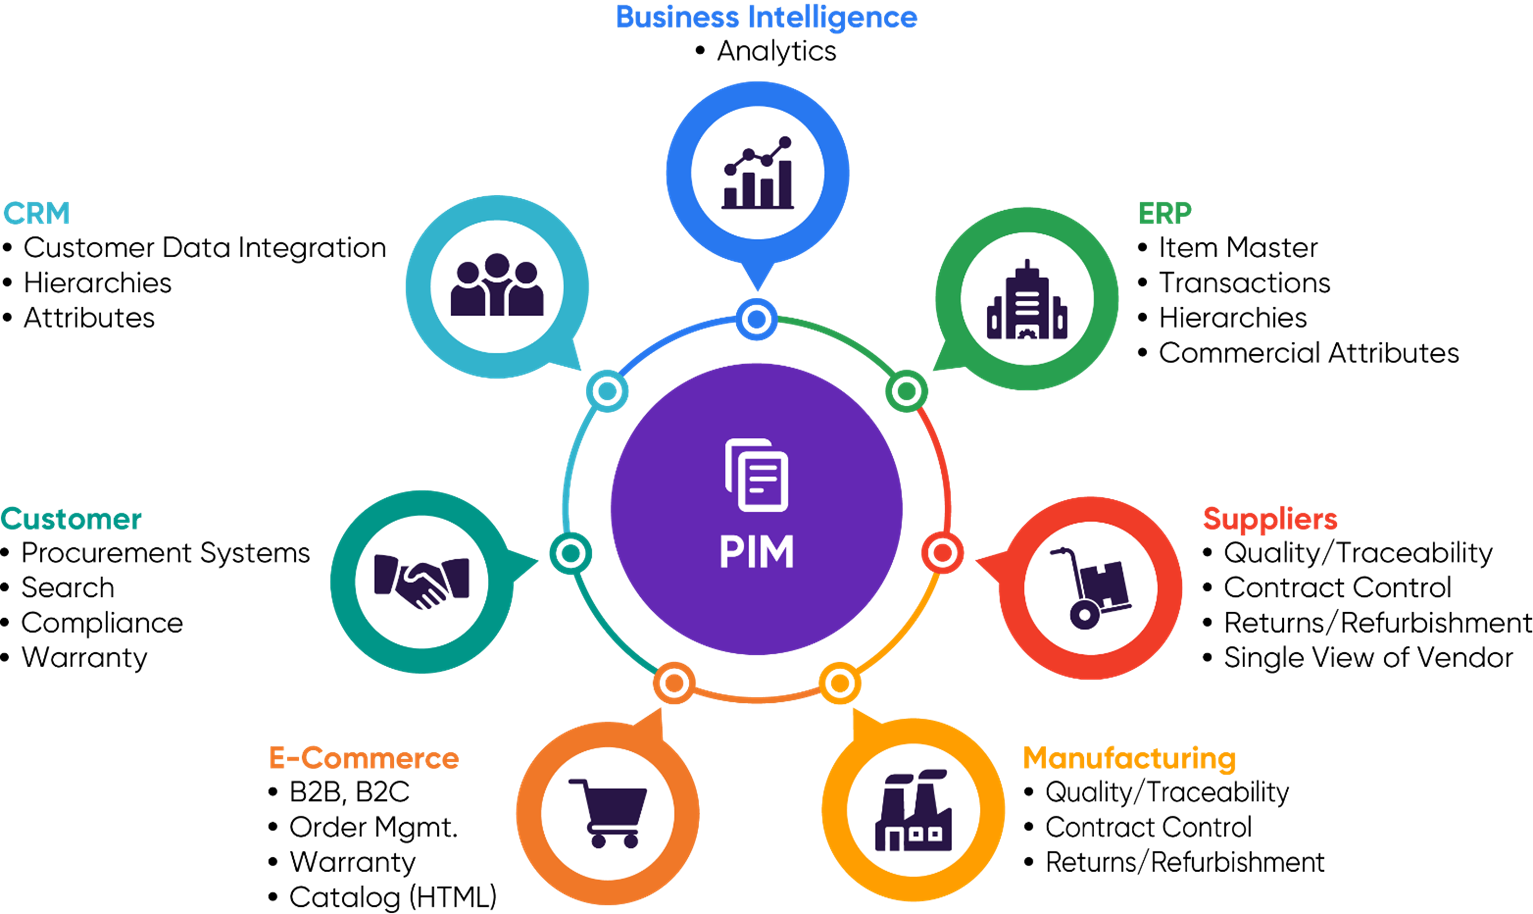 A colorful graphic showing a Product Information Management system ecosystem.